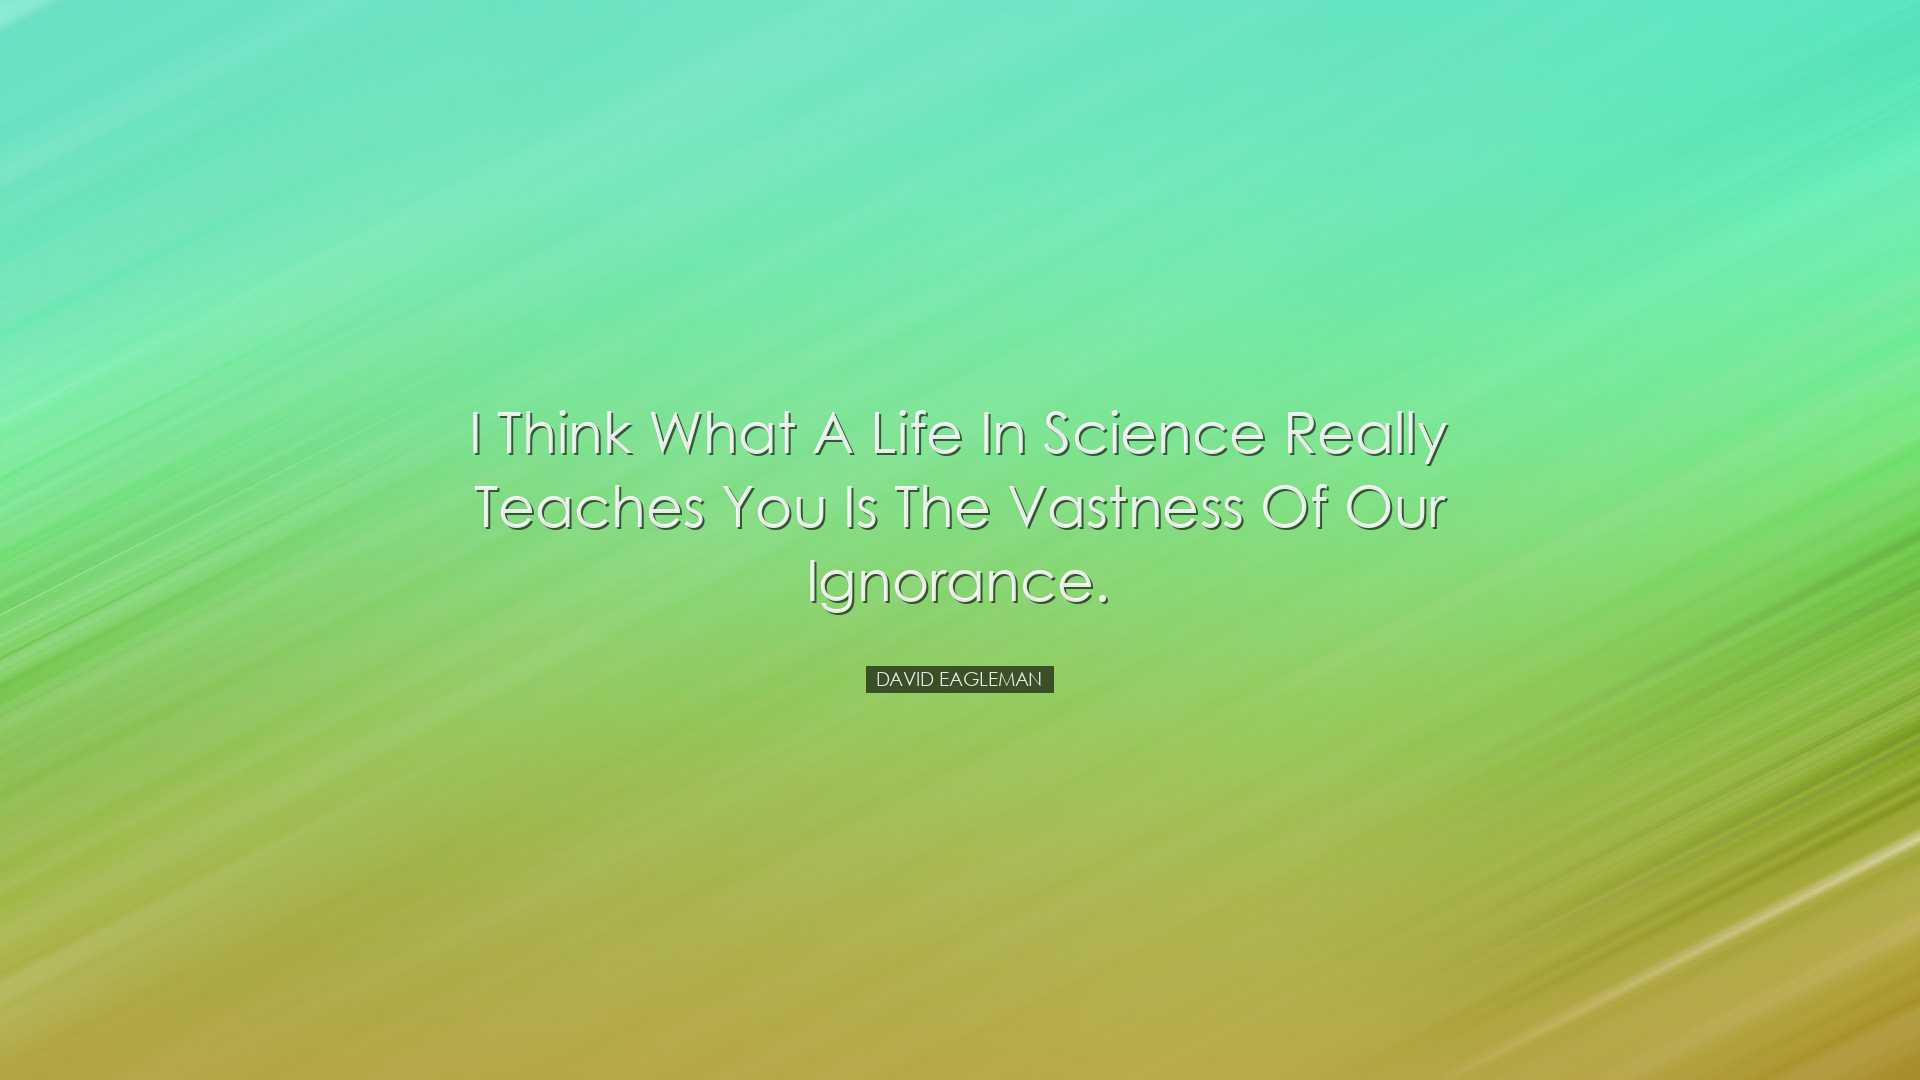 I think what a life in science really teaches you is the vastness